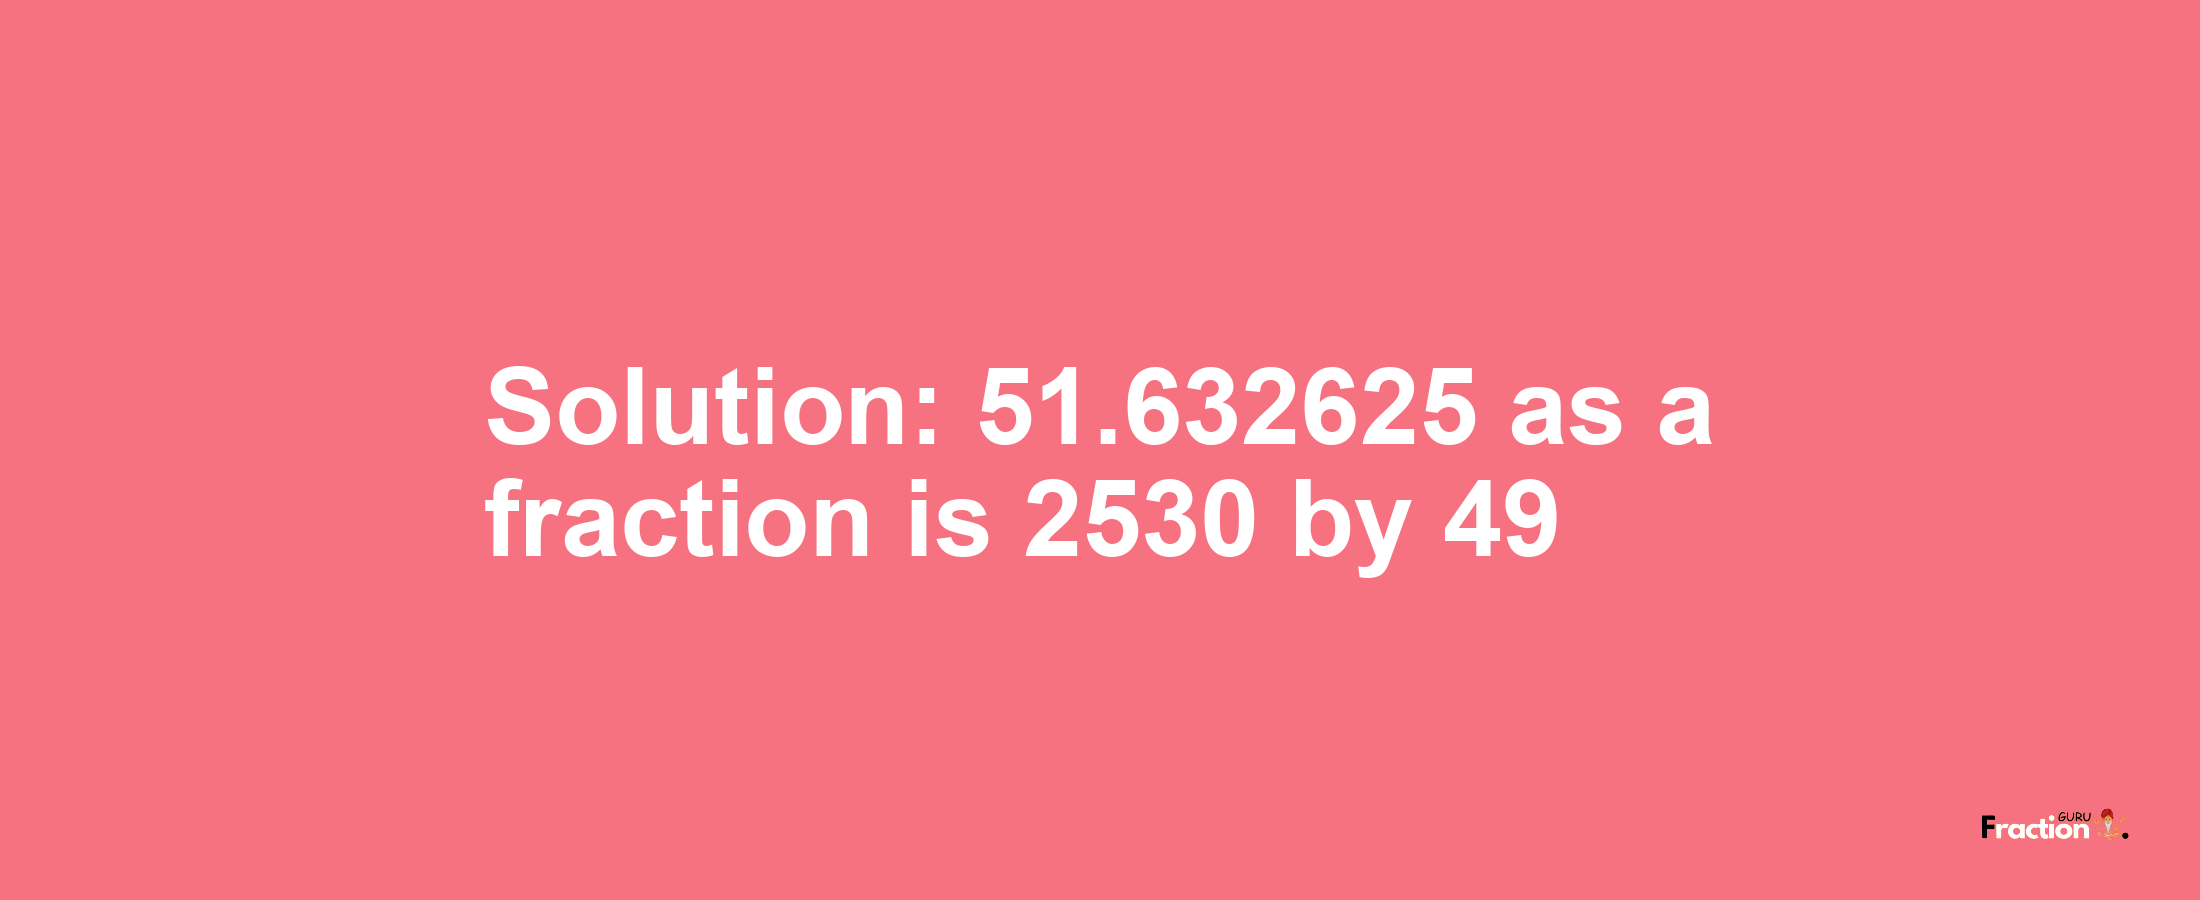 Solution:51.632625 as a fraction is 2530/49